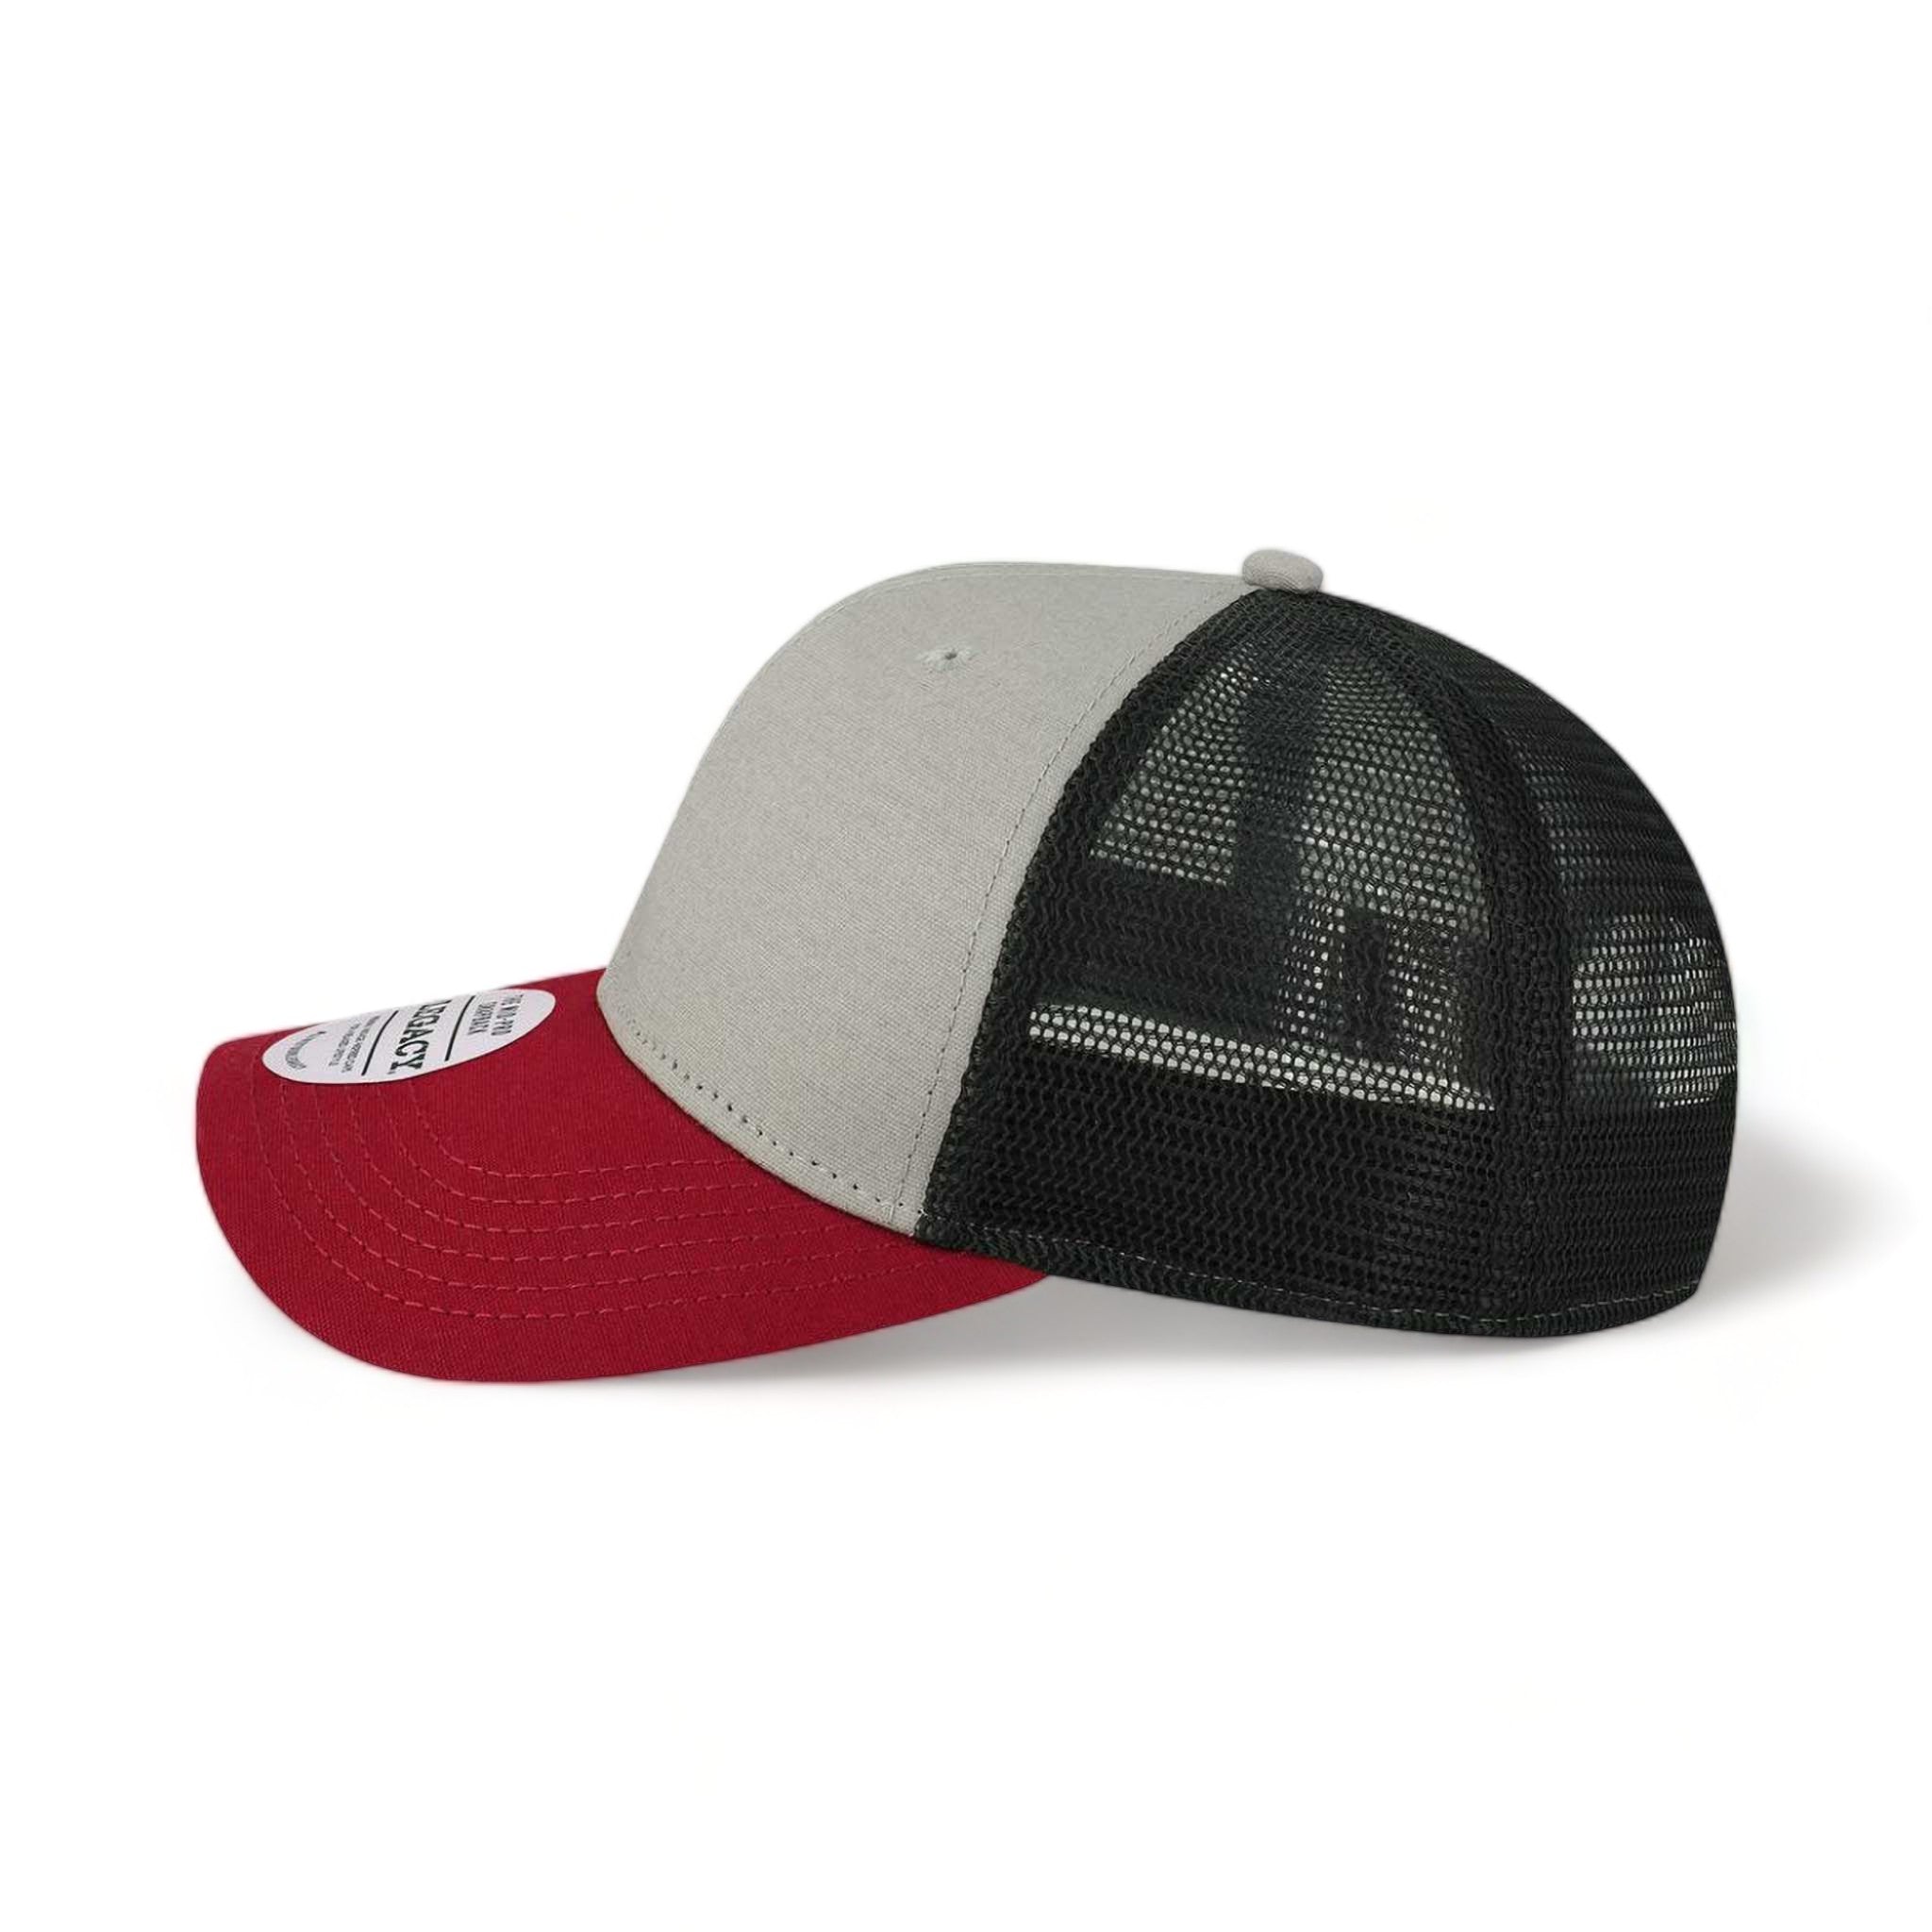 Side view of LEGACY MPS custom hat in grey, burgundy and black